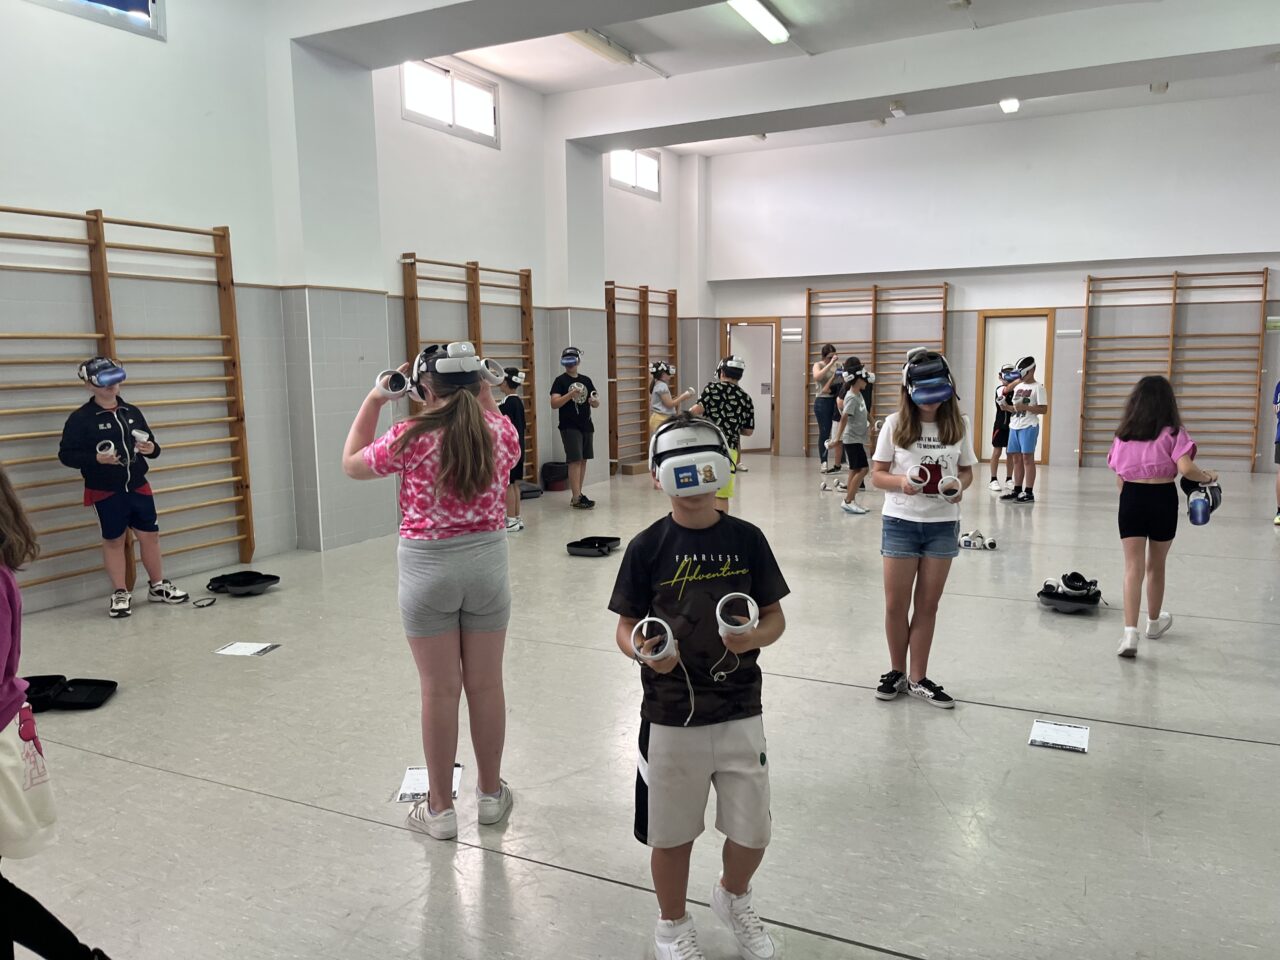 A boy stands in the foreground of a sports hall facing the camera wearing a VR headset. Several boys and girls also wearing VR headsets stand at a distance from each other and facing in different directions in the sports hall.